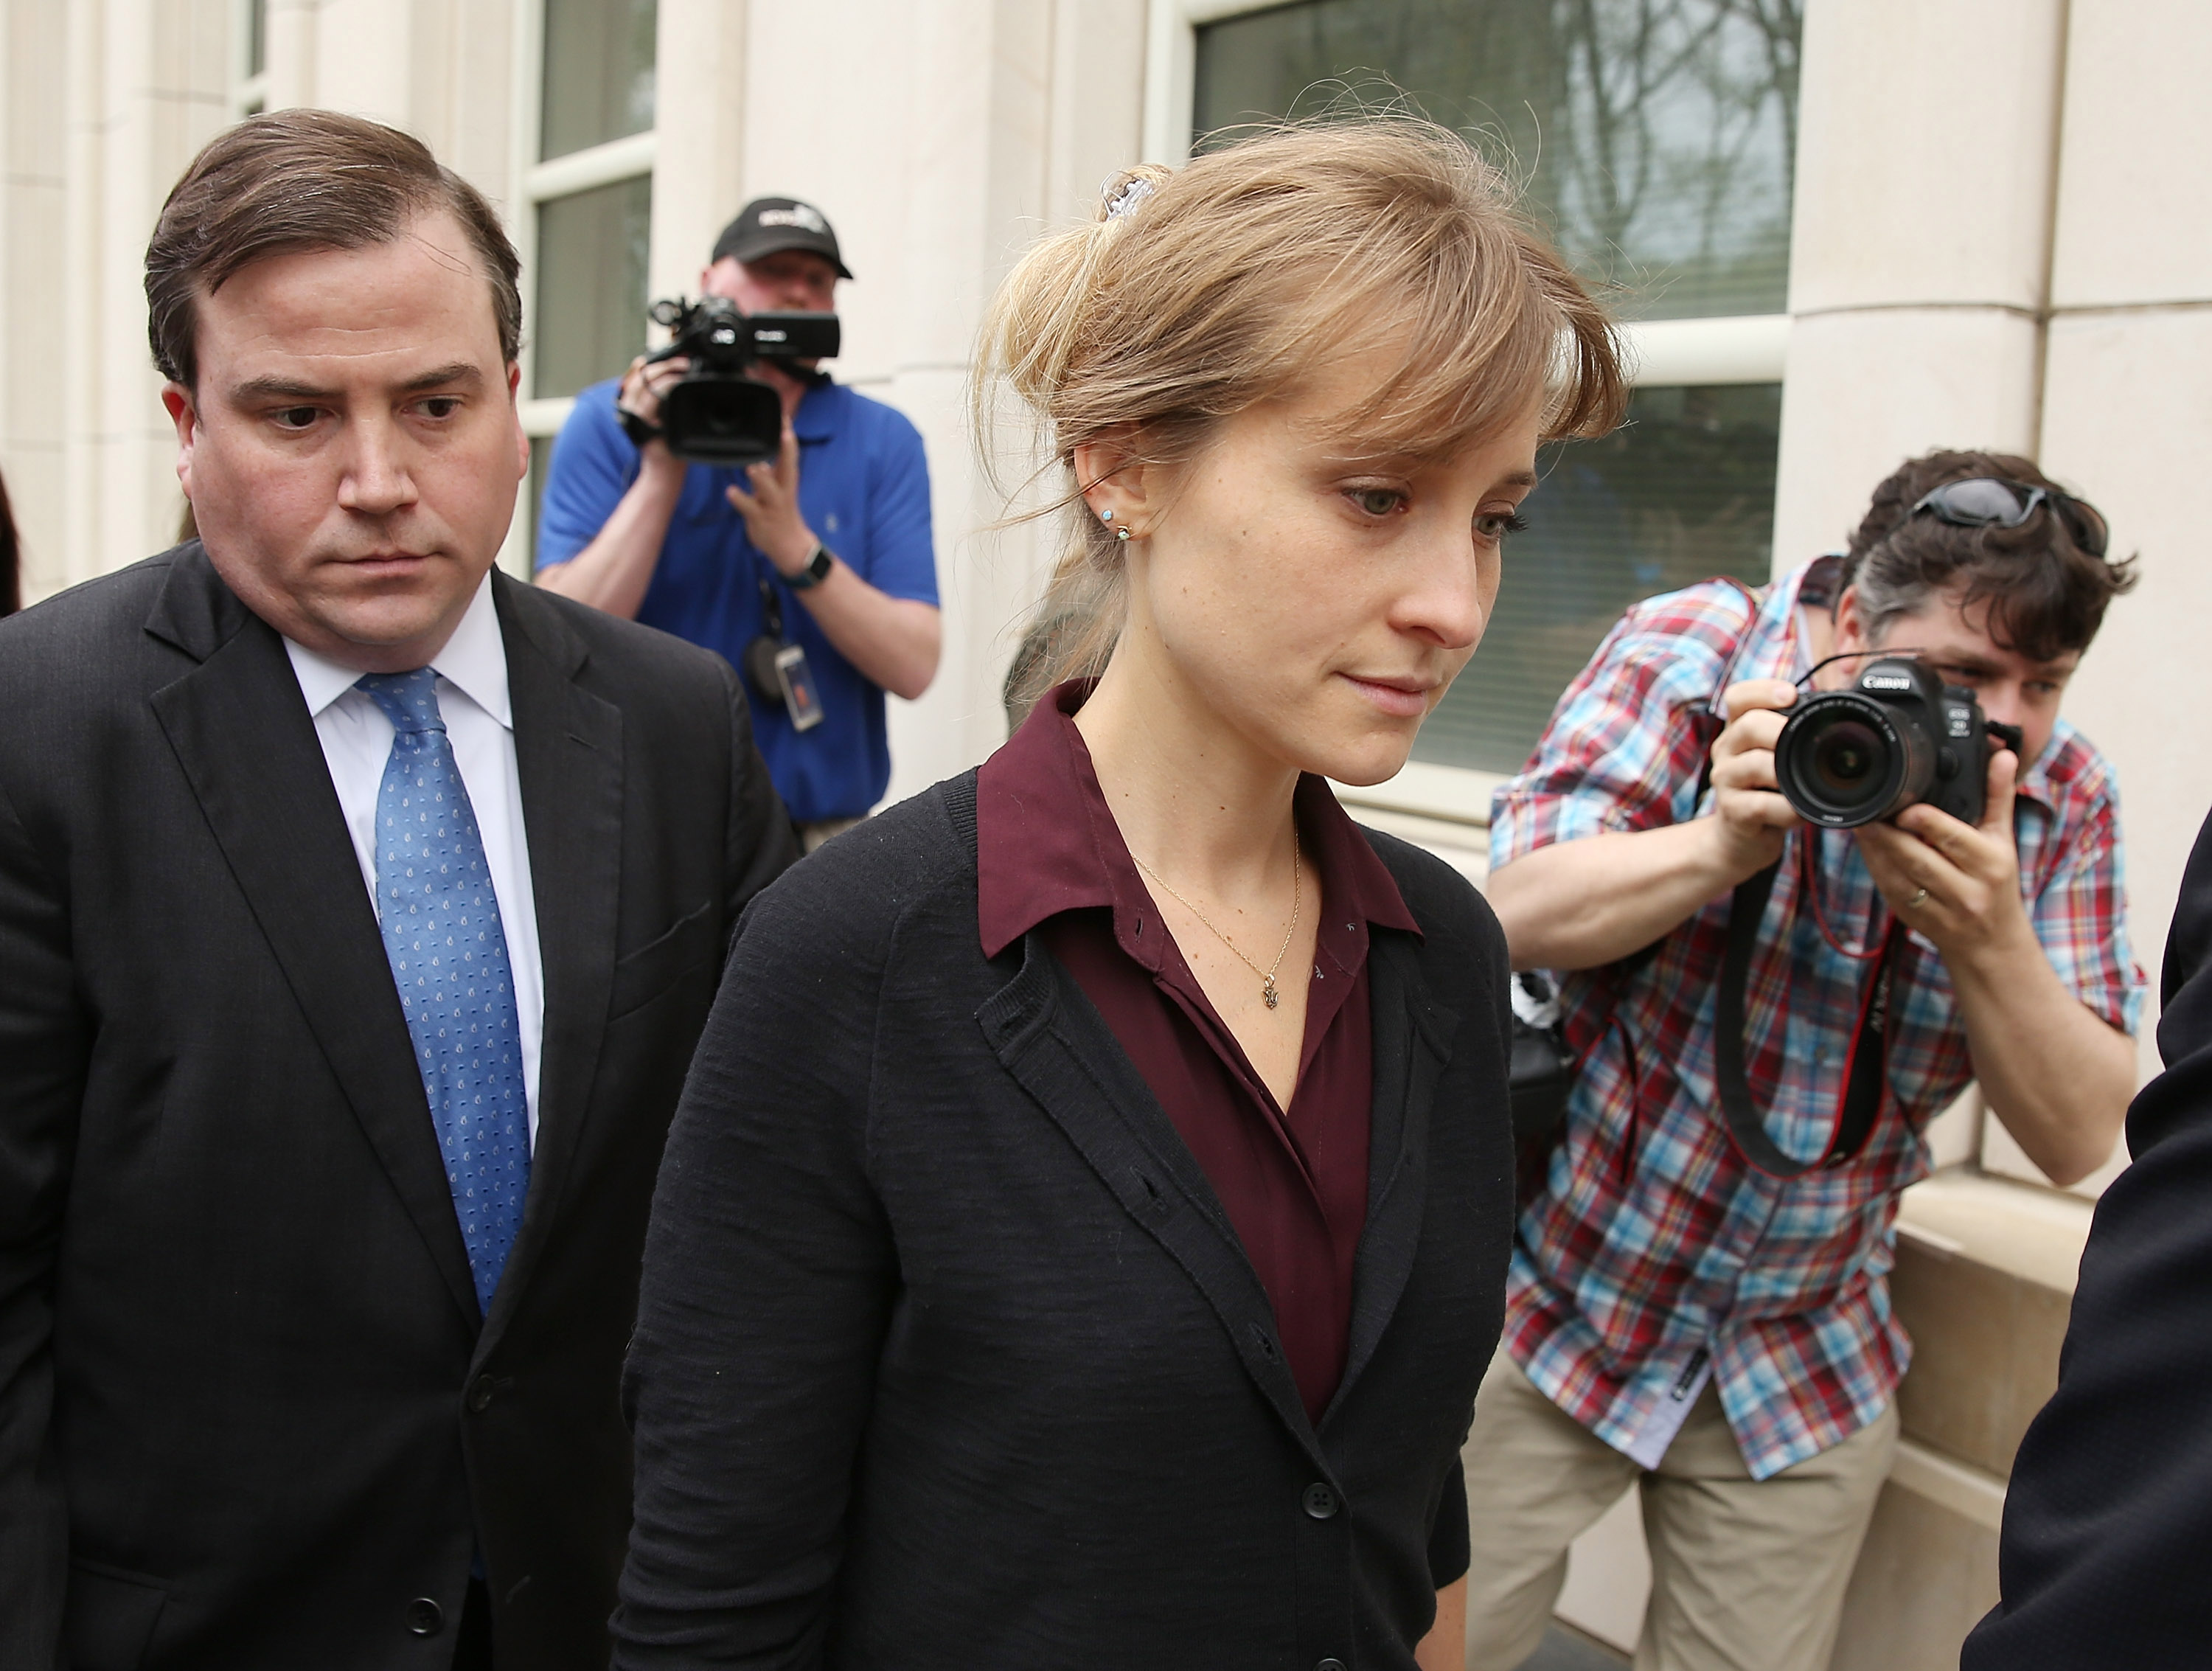 Actress Says She Was Lured Into Nxivm Sex Cult By Tv Star Allison Mack